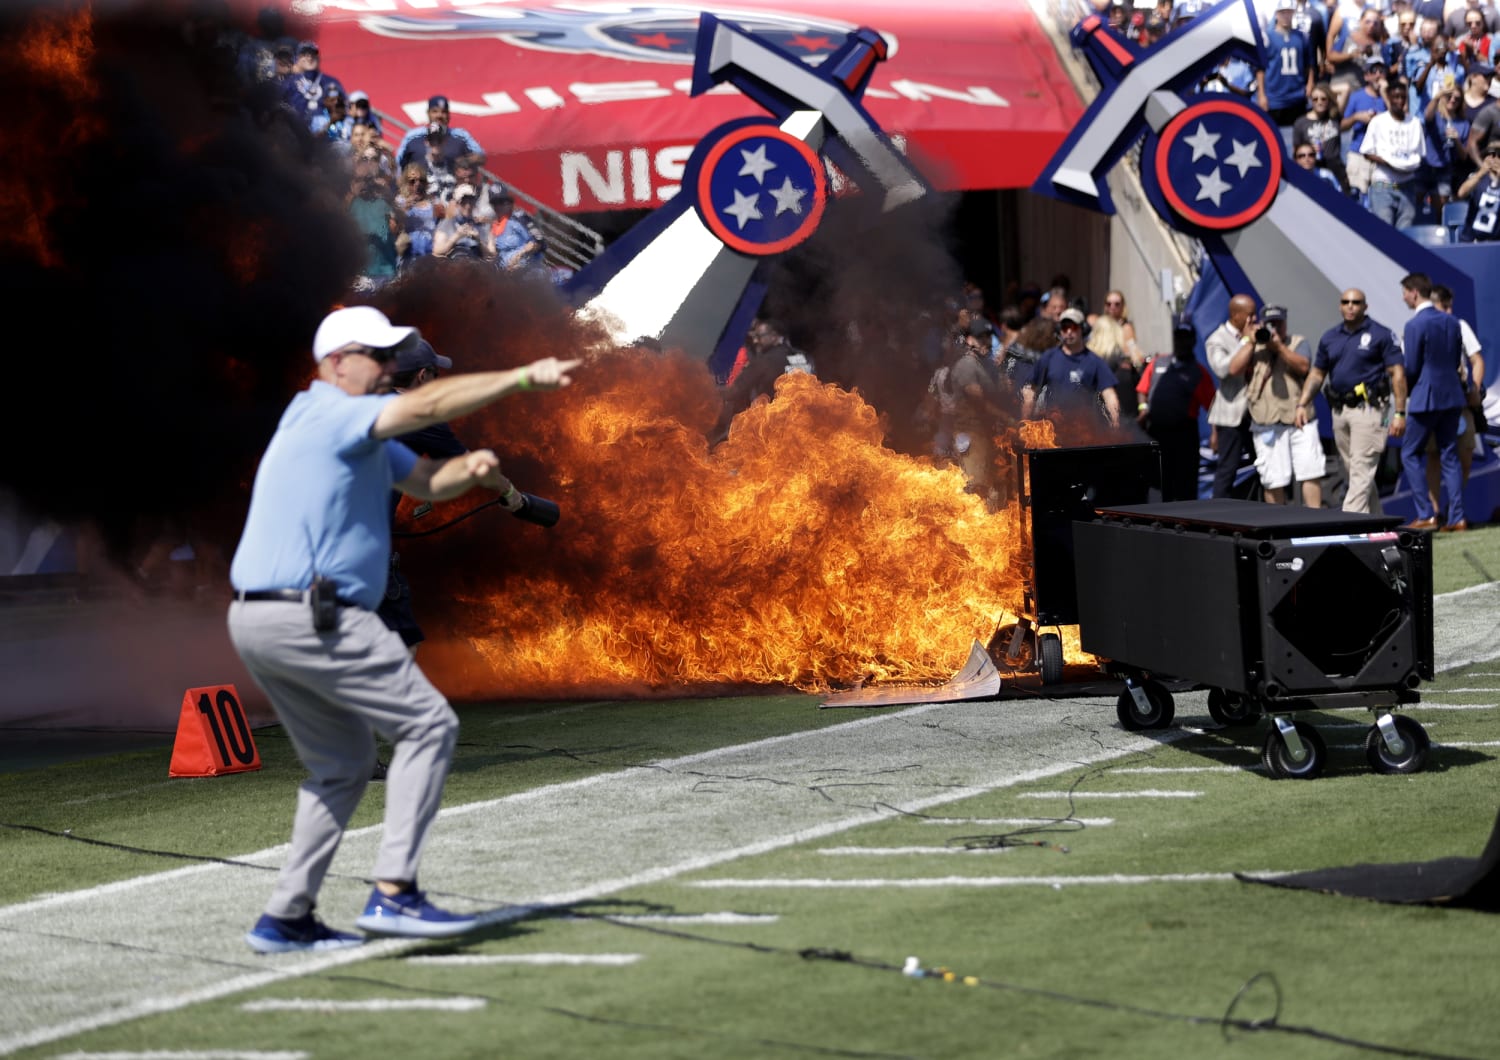 Dramatic images show on-field blaze before Titans-Colts kickoff